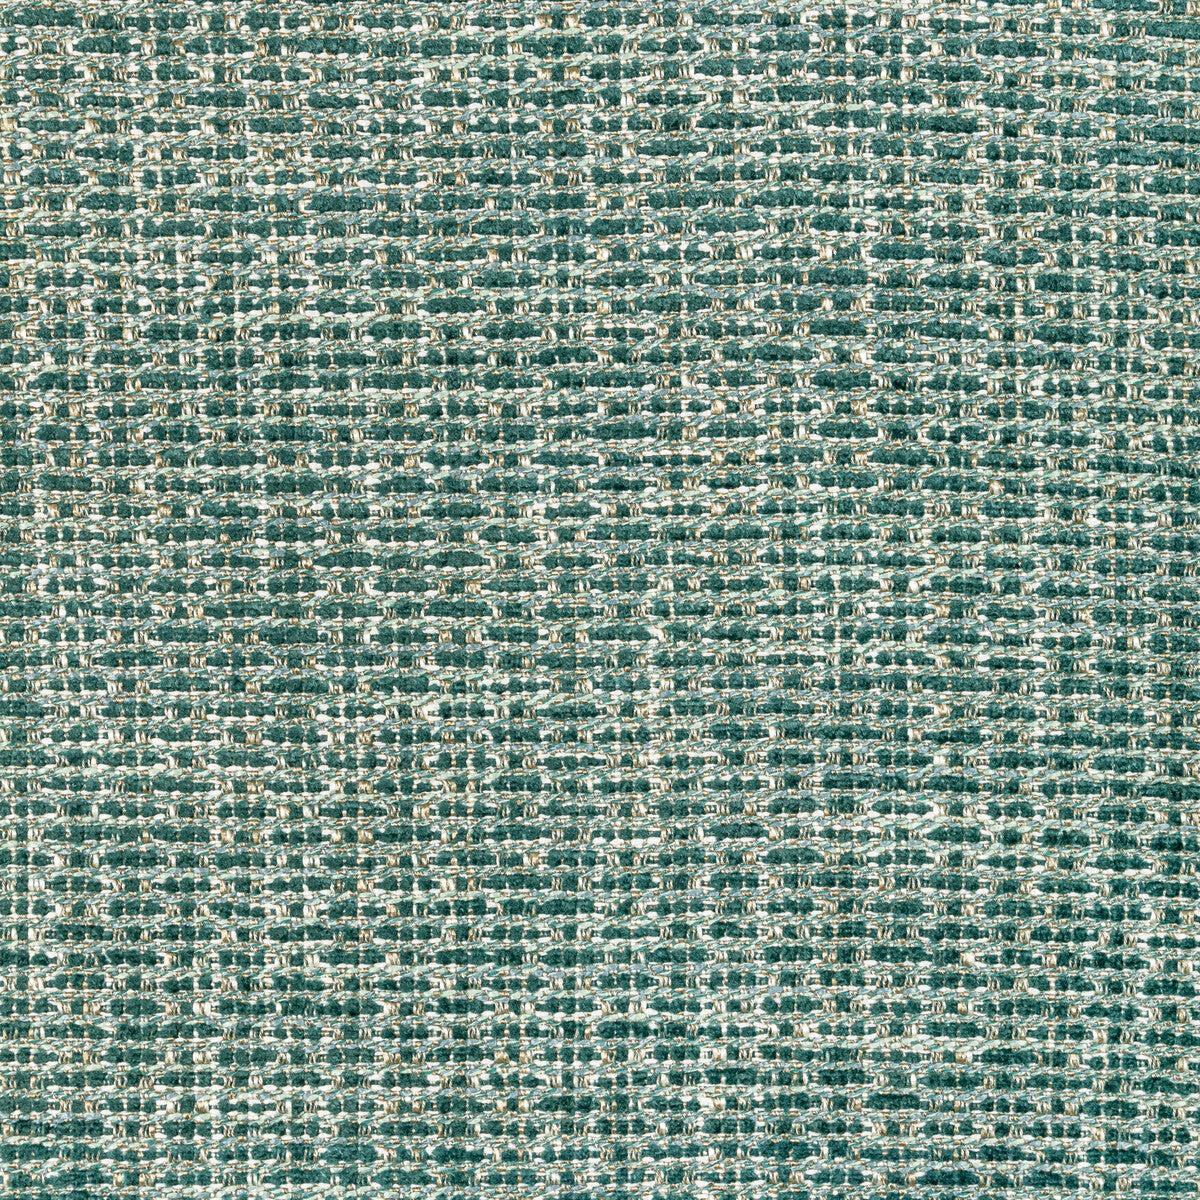 Kravet Design fabric in 36409-35 color - pattern 36409.35.0 - by Kravet Design in the Performance Crypton Home collection